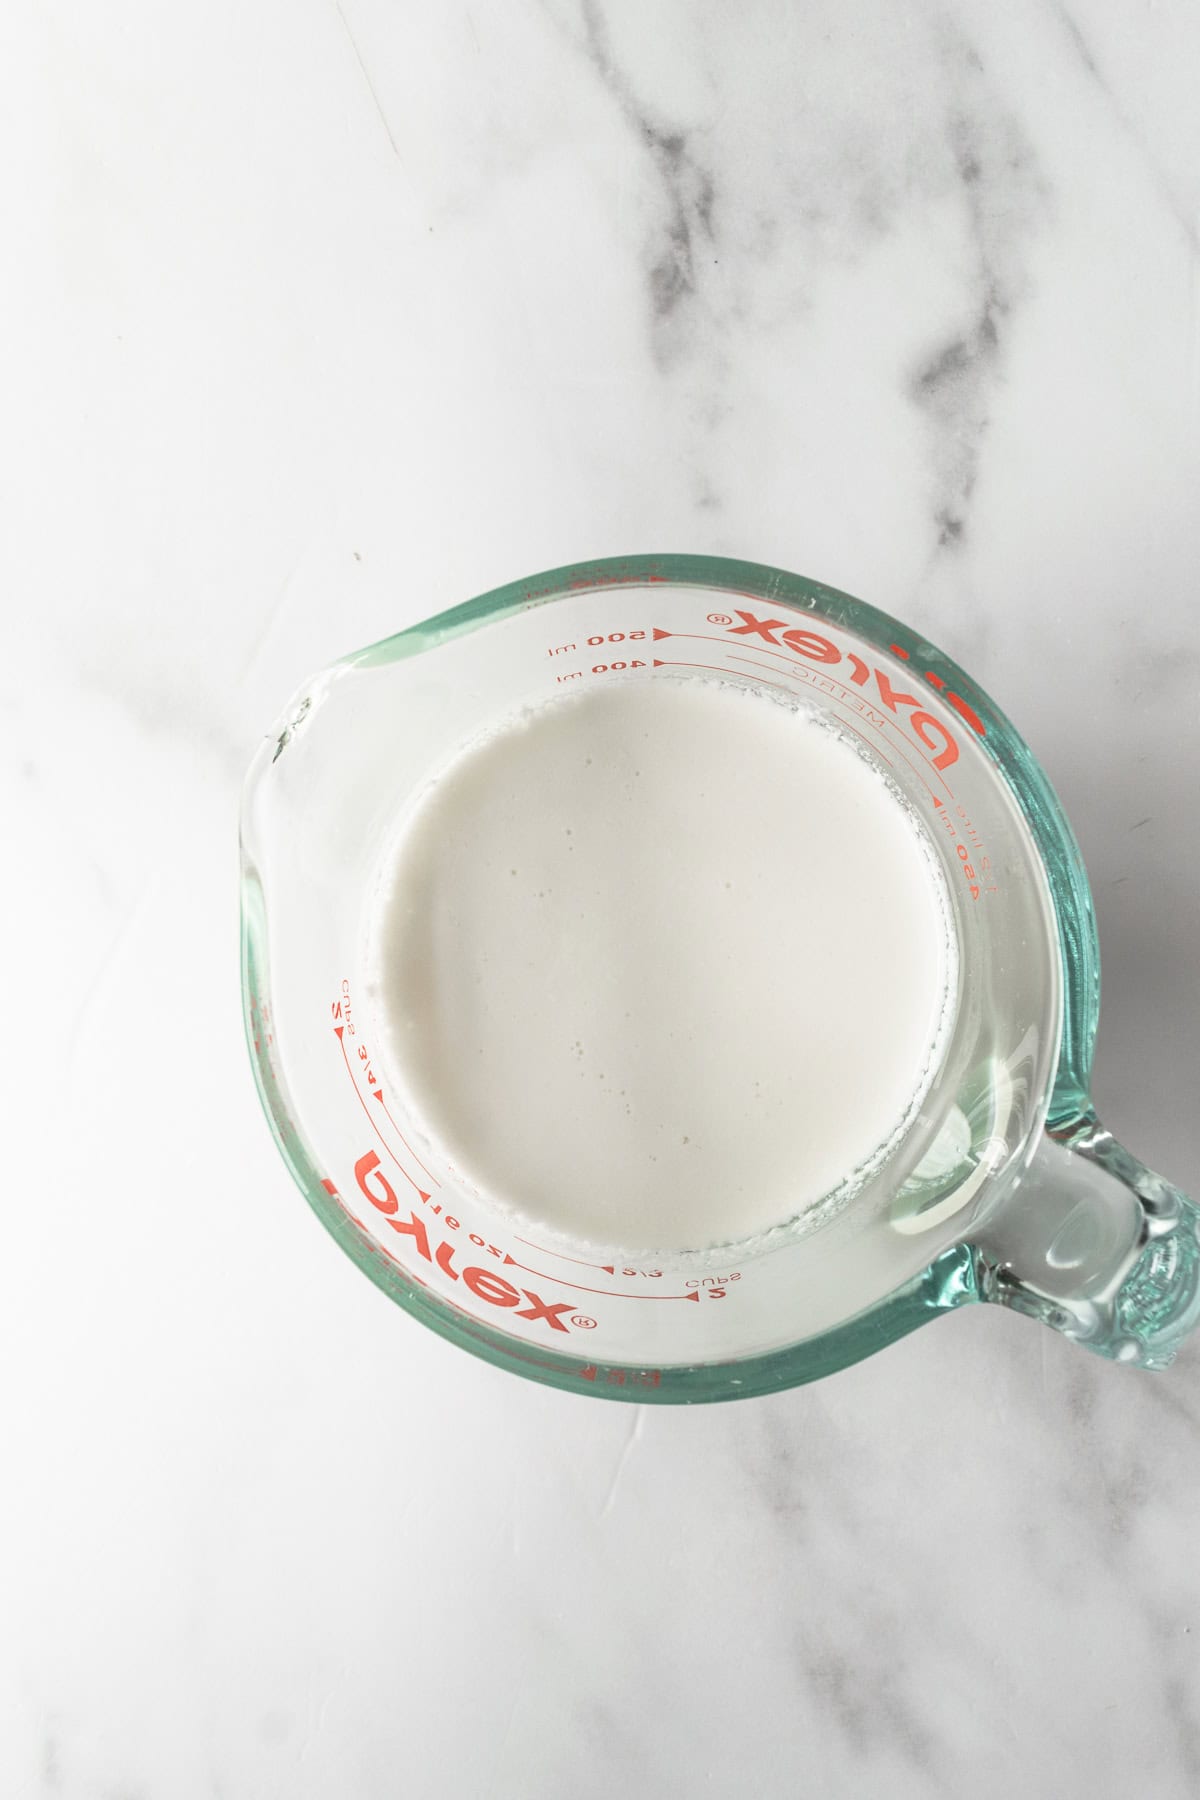 homemade buttermilk in a glass measuring cup on a white table.